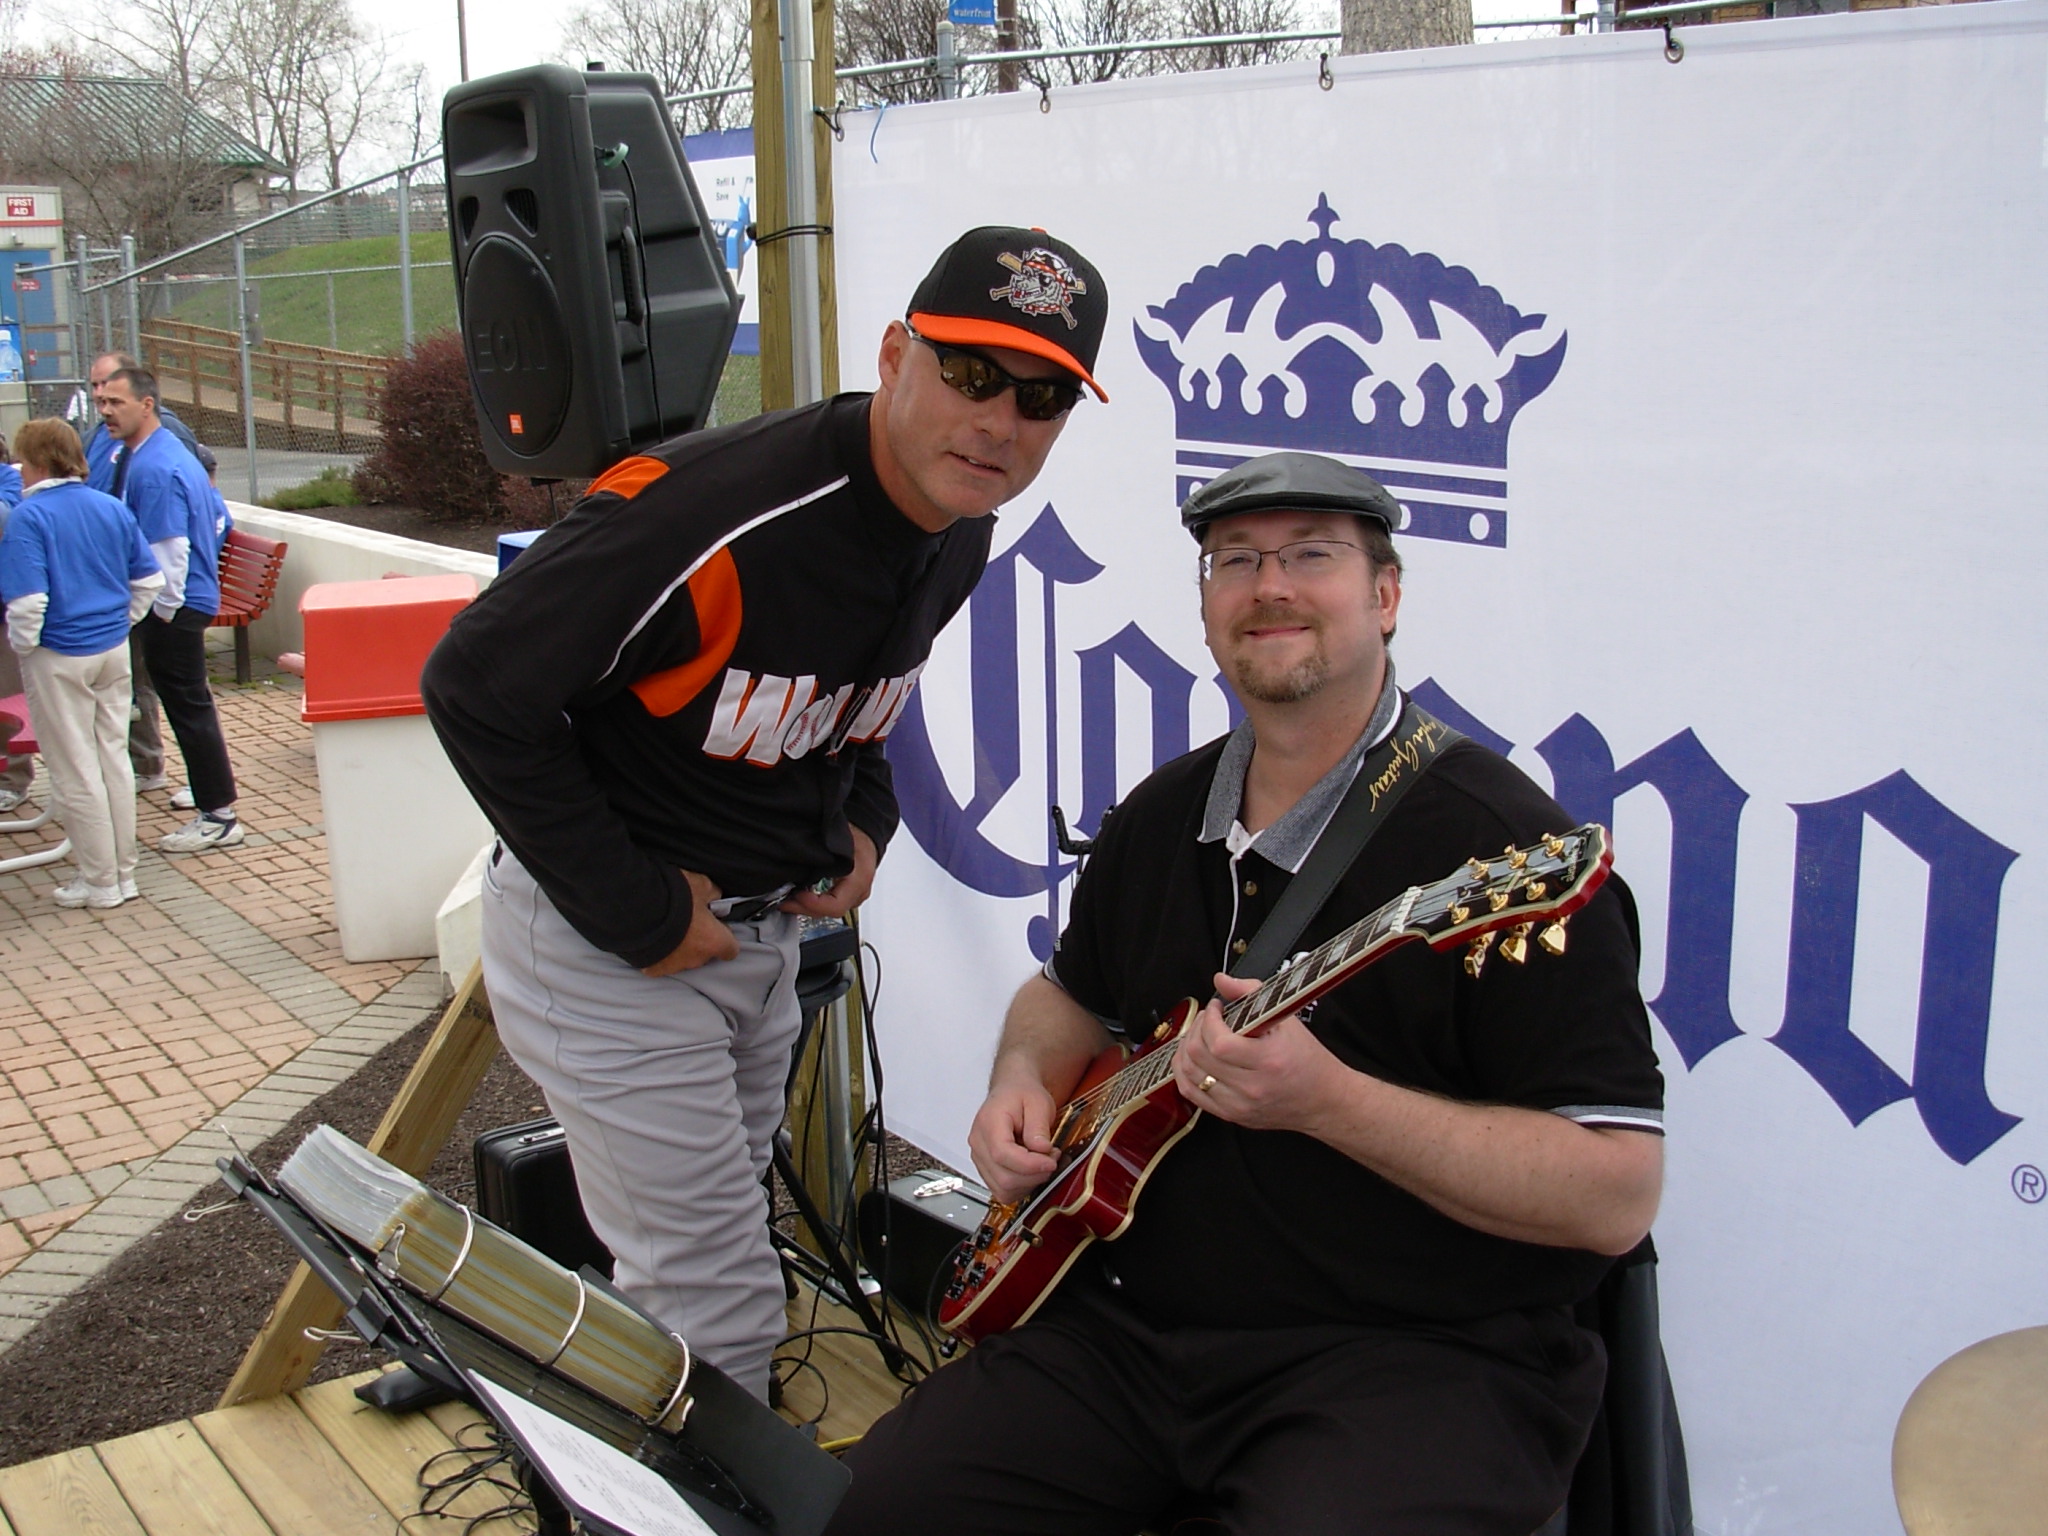 A player from the Erie Seawolves checking out Dougs guitar
